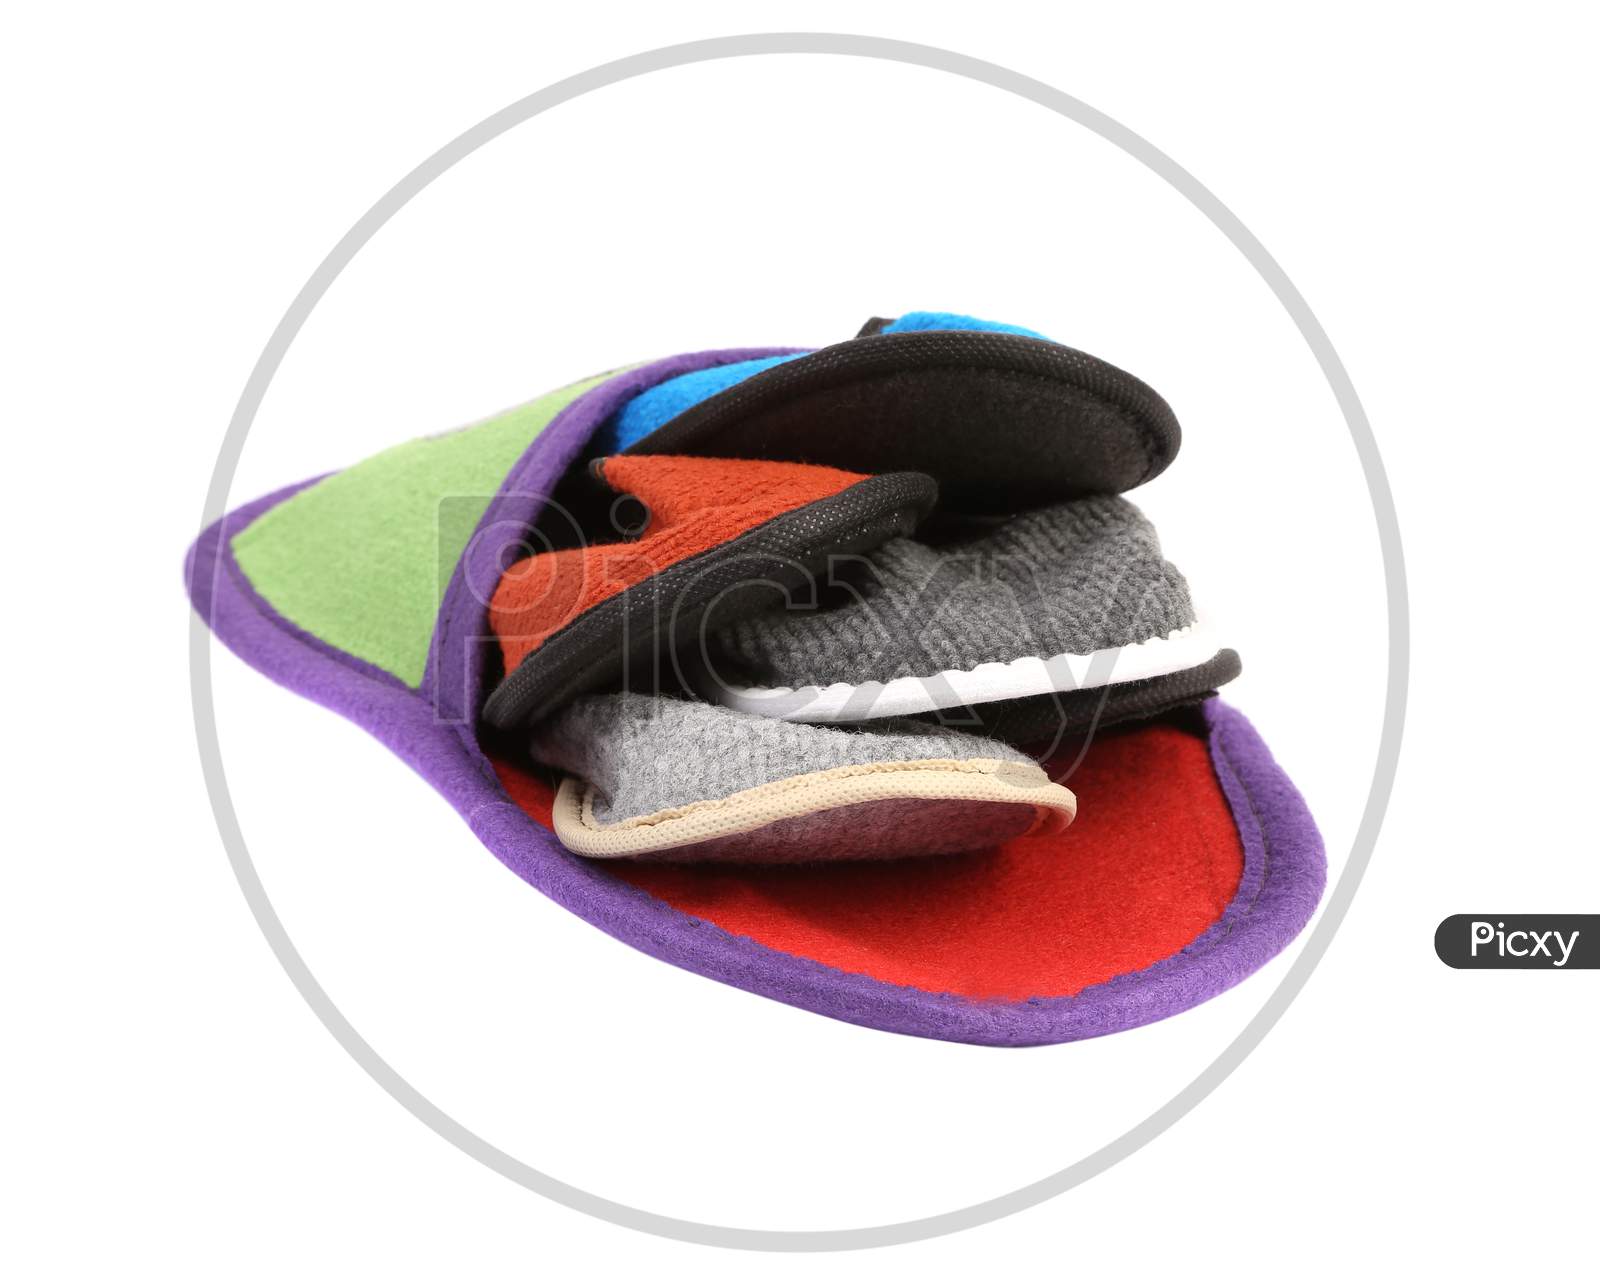 Colourful Slippers Into Big Slipper. Isolated On A White Background.